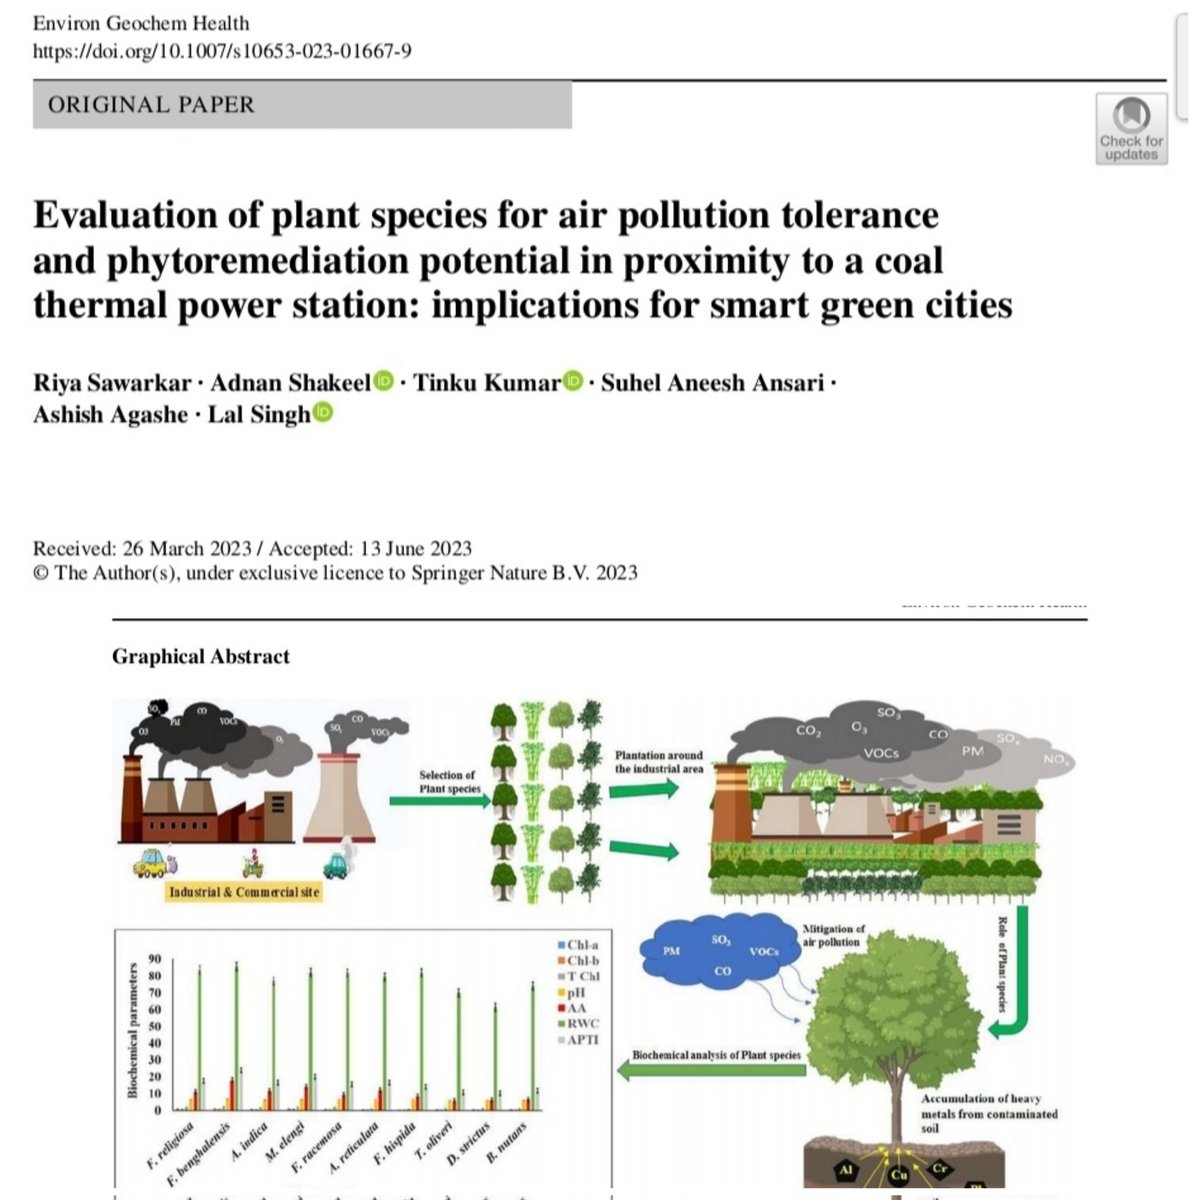 Alhamdulillah. Pleased to share our recent research article published in Environmental Geochemistry and Health, @SpringerNature (#IF:5). This is an interesting work to design smart cities in industrial areas through selection of tolerant plant species.